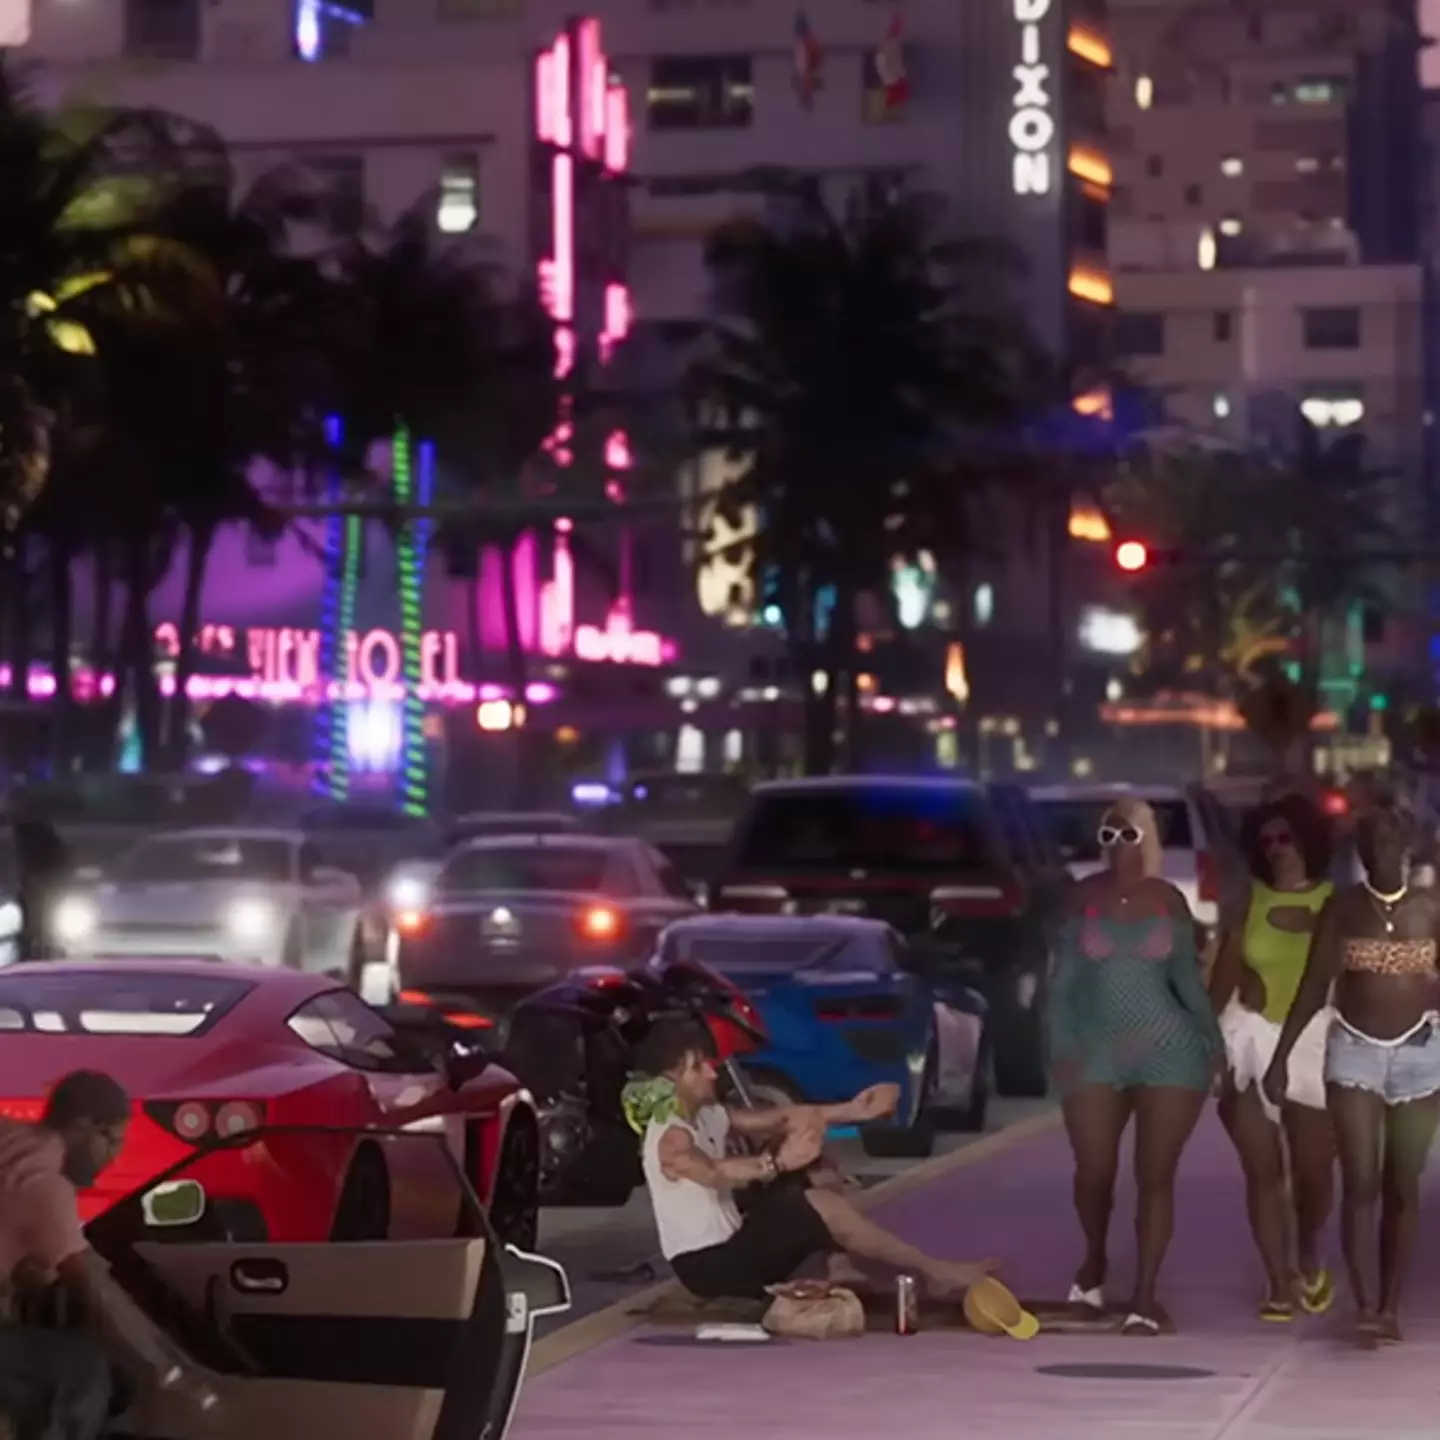 GTA fans divided over what they think is ‘the best scene in the trailer’